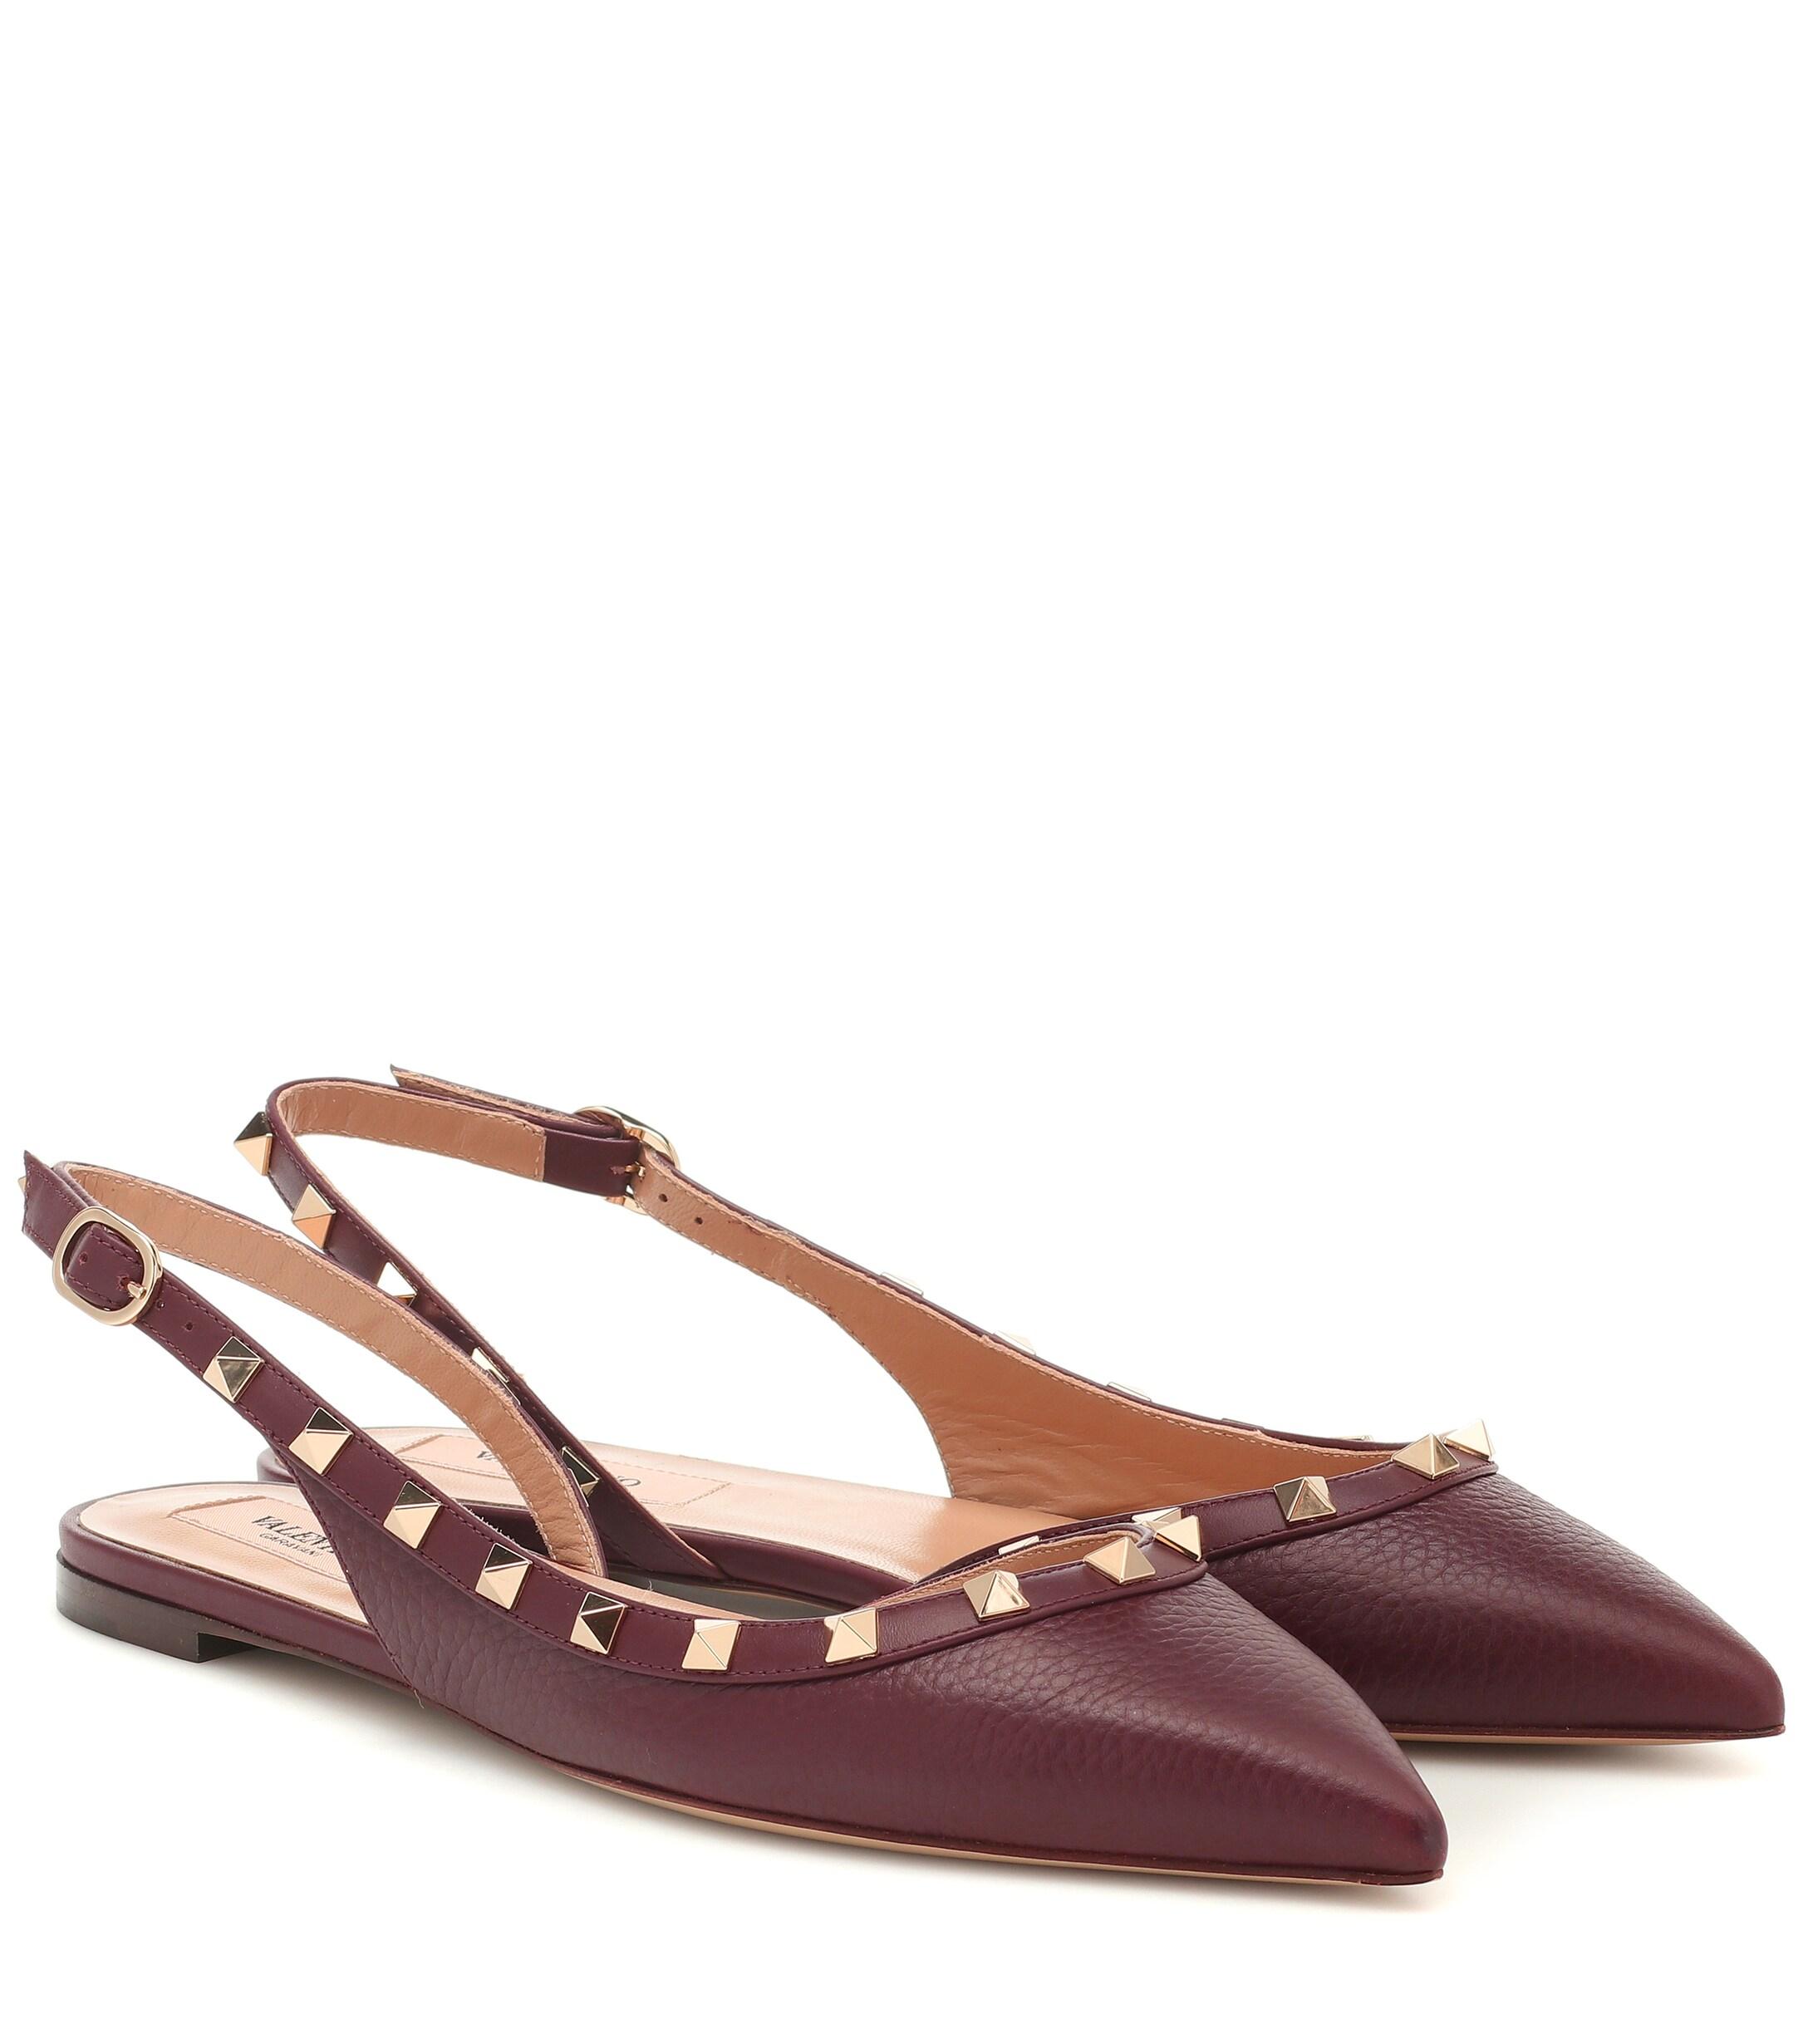 Valentino Rockstud Leather Slingback Ballet Flats in Red - Lyst